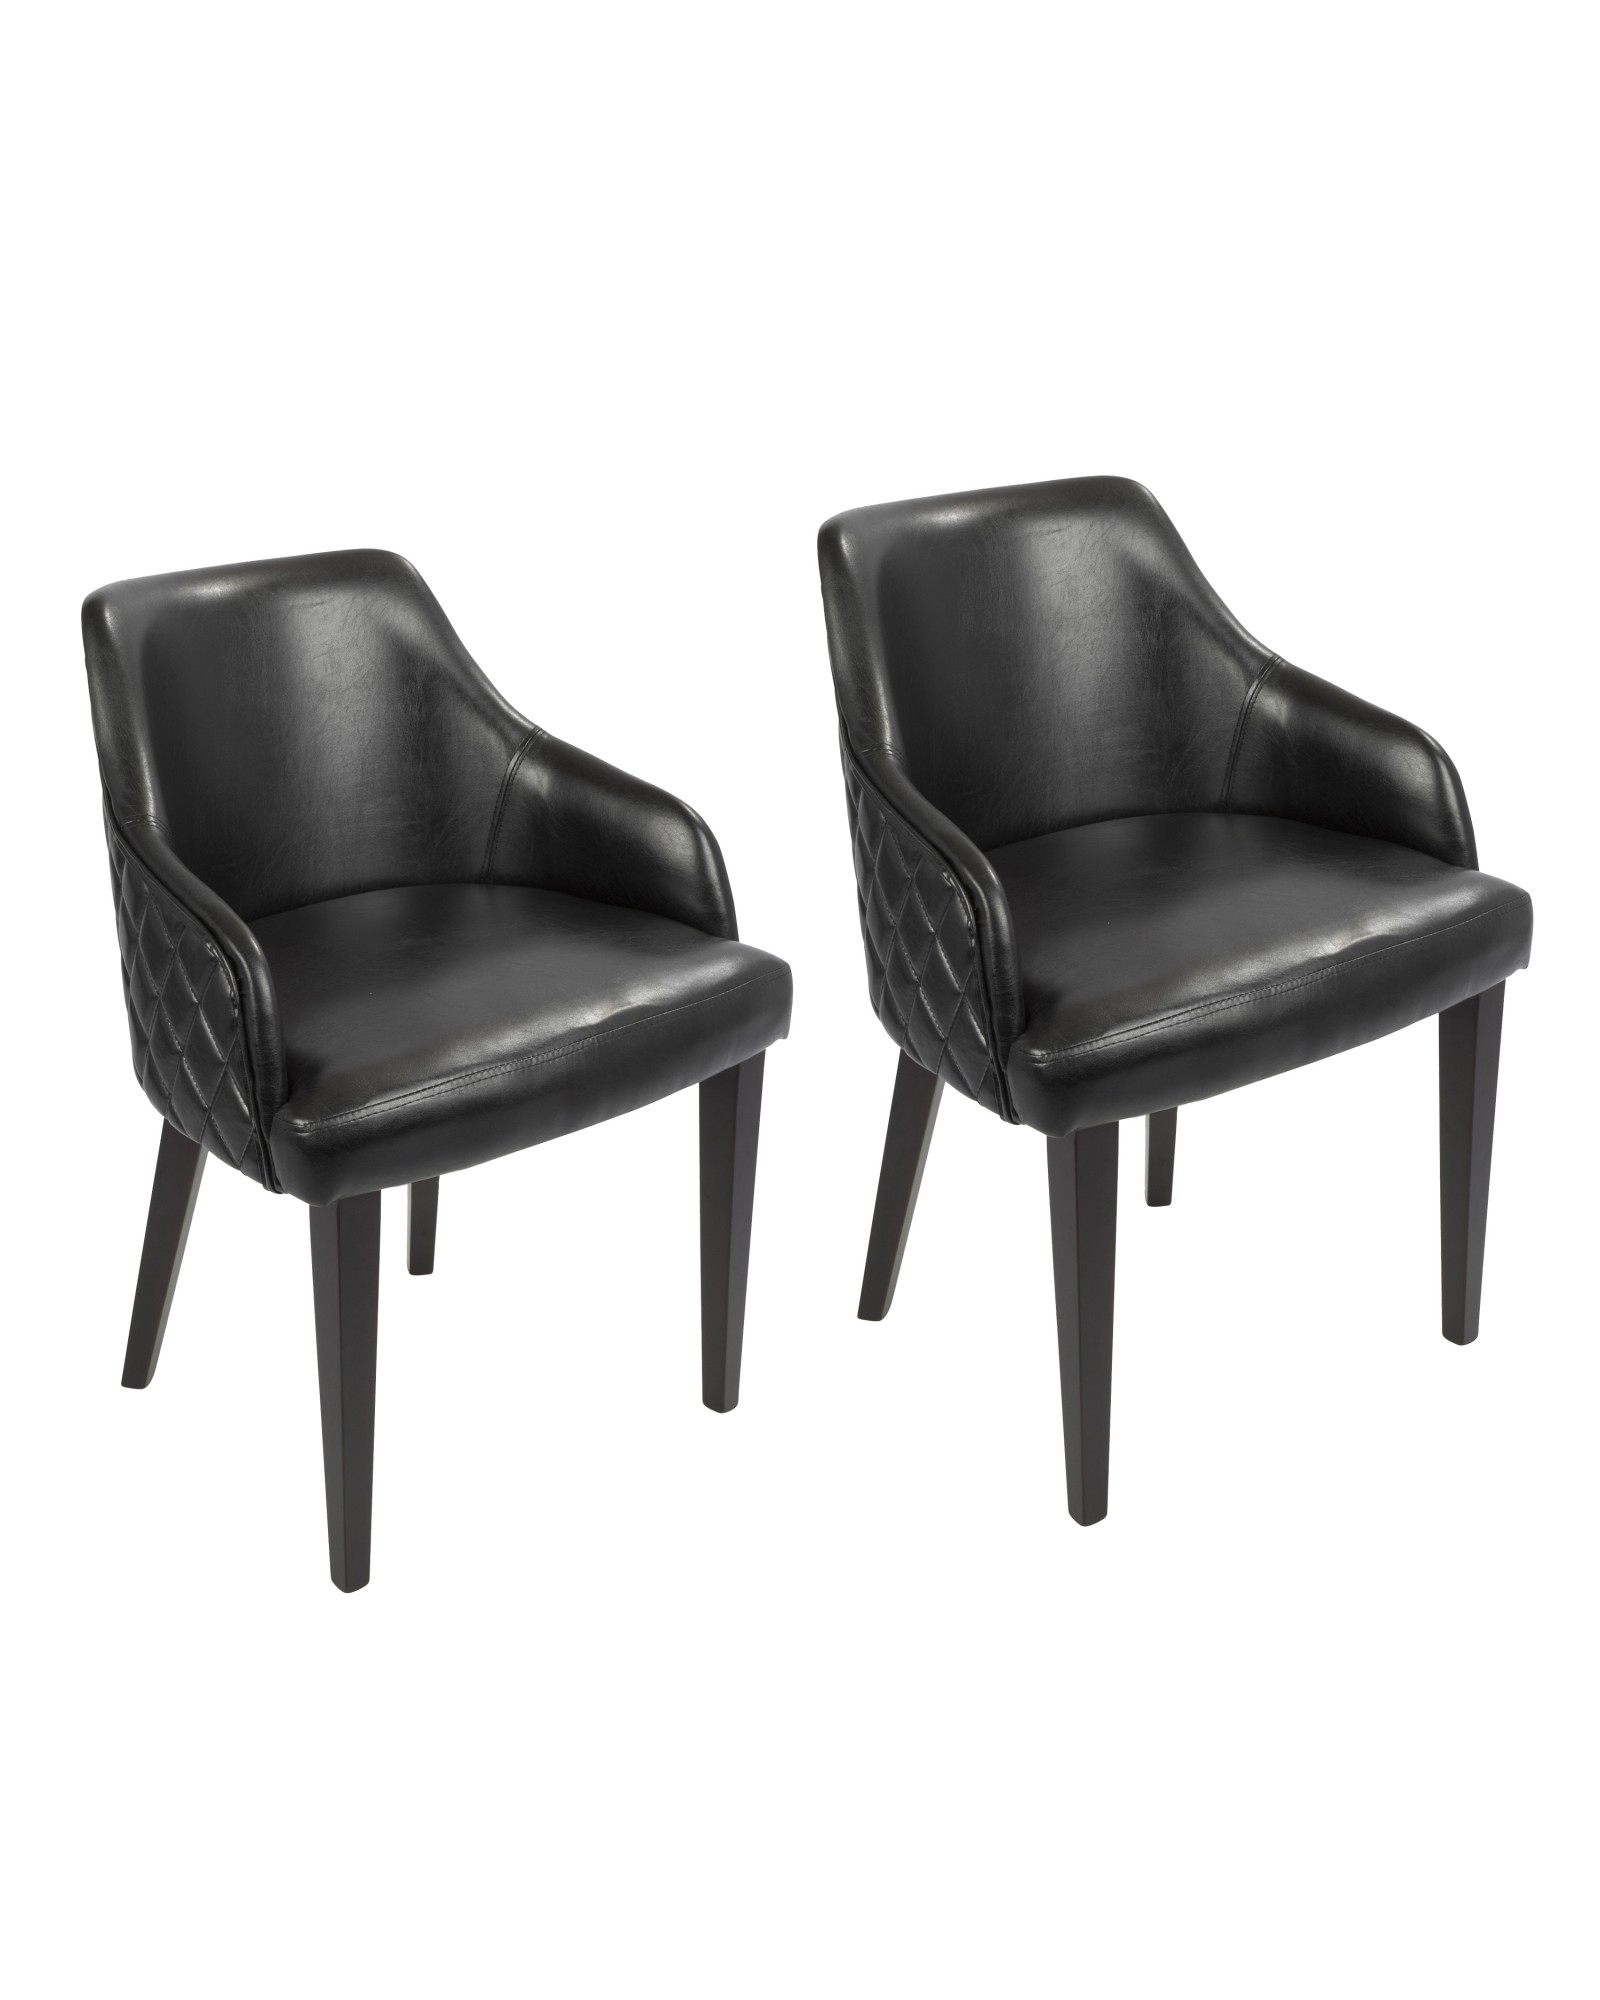 Esteban Contemporary Dining Chair in Espresso with Black Faux Leather - Set of 2